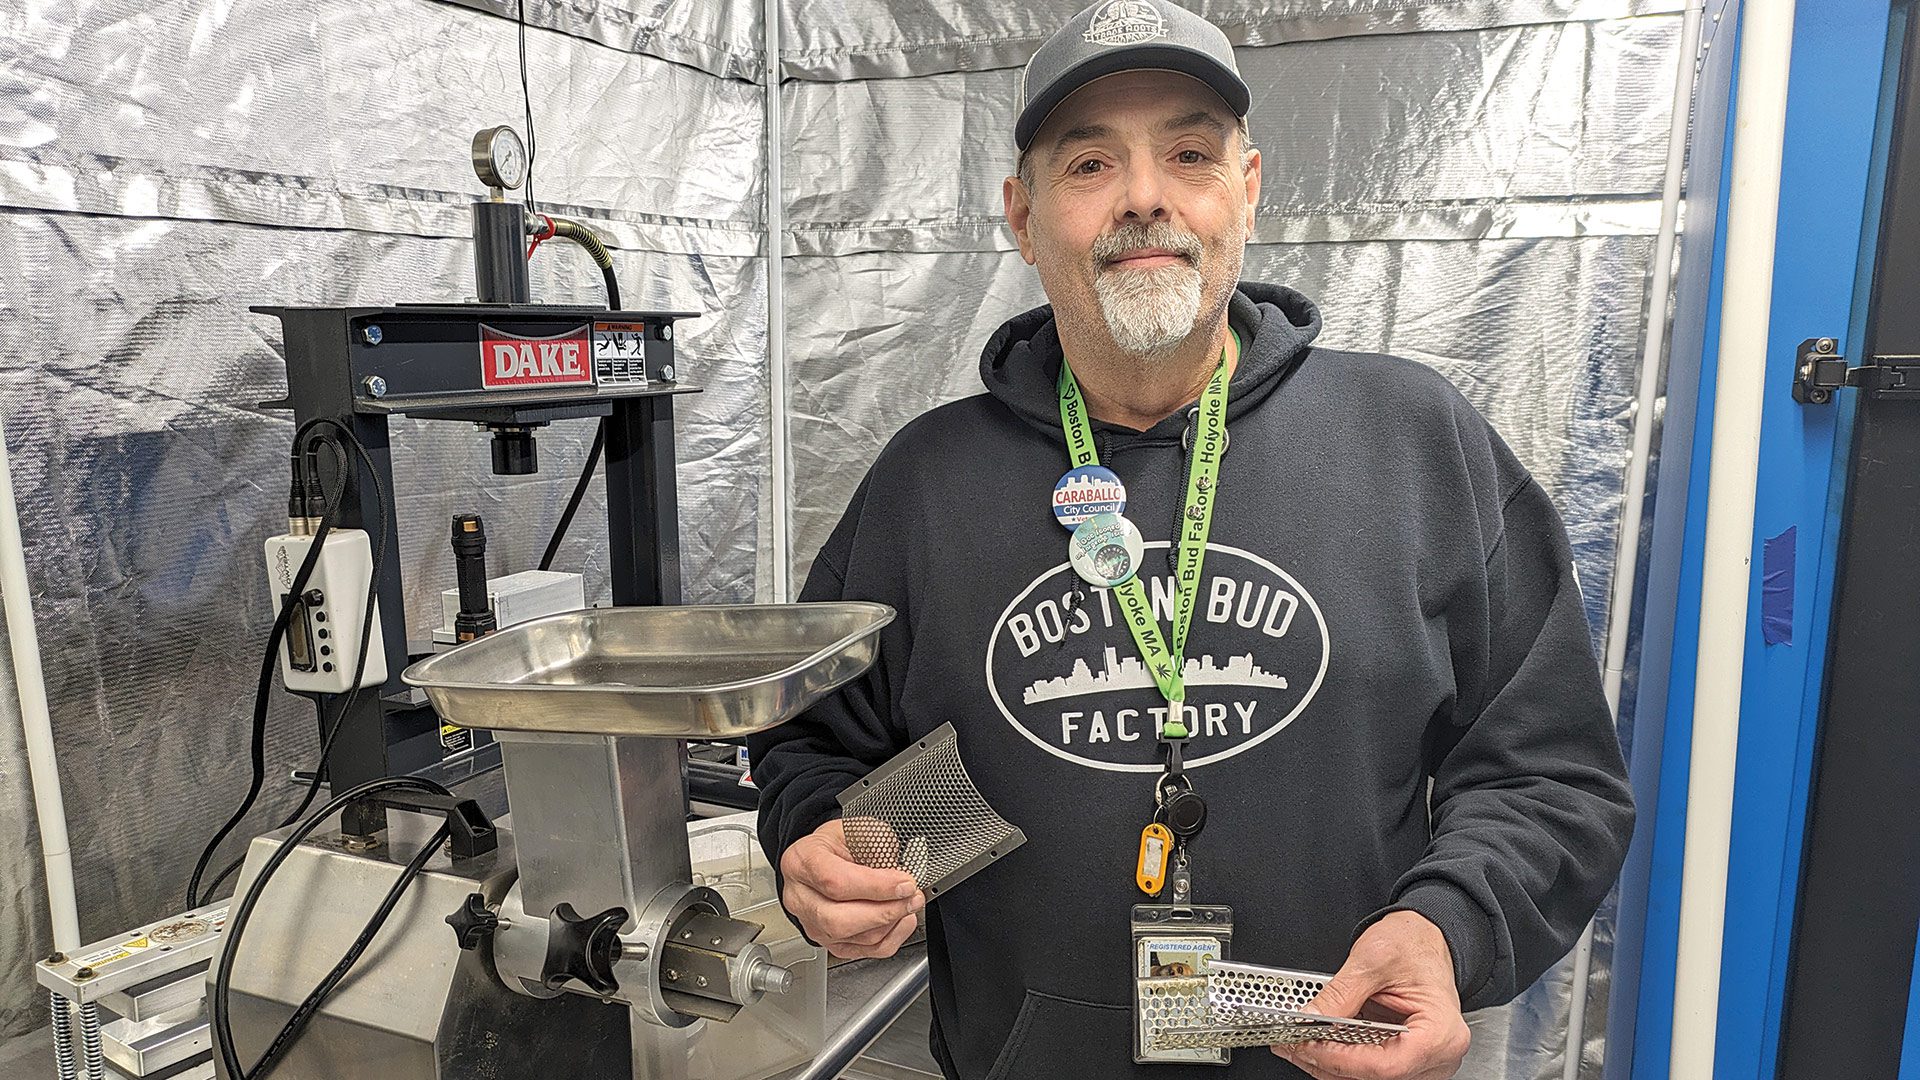 Frank Dailey shows off some equipment used to grind cannabis.